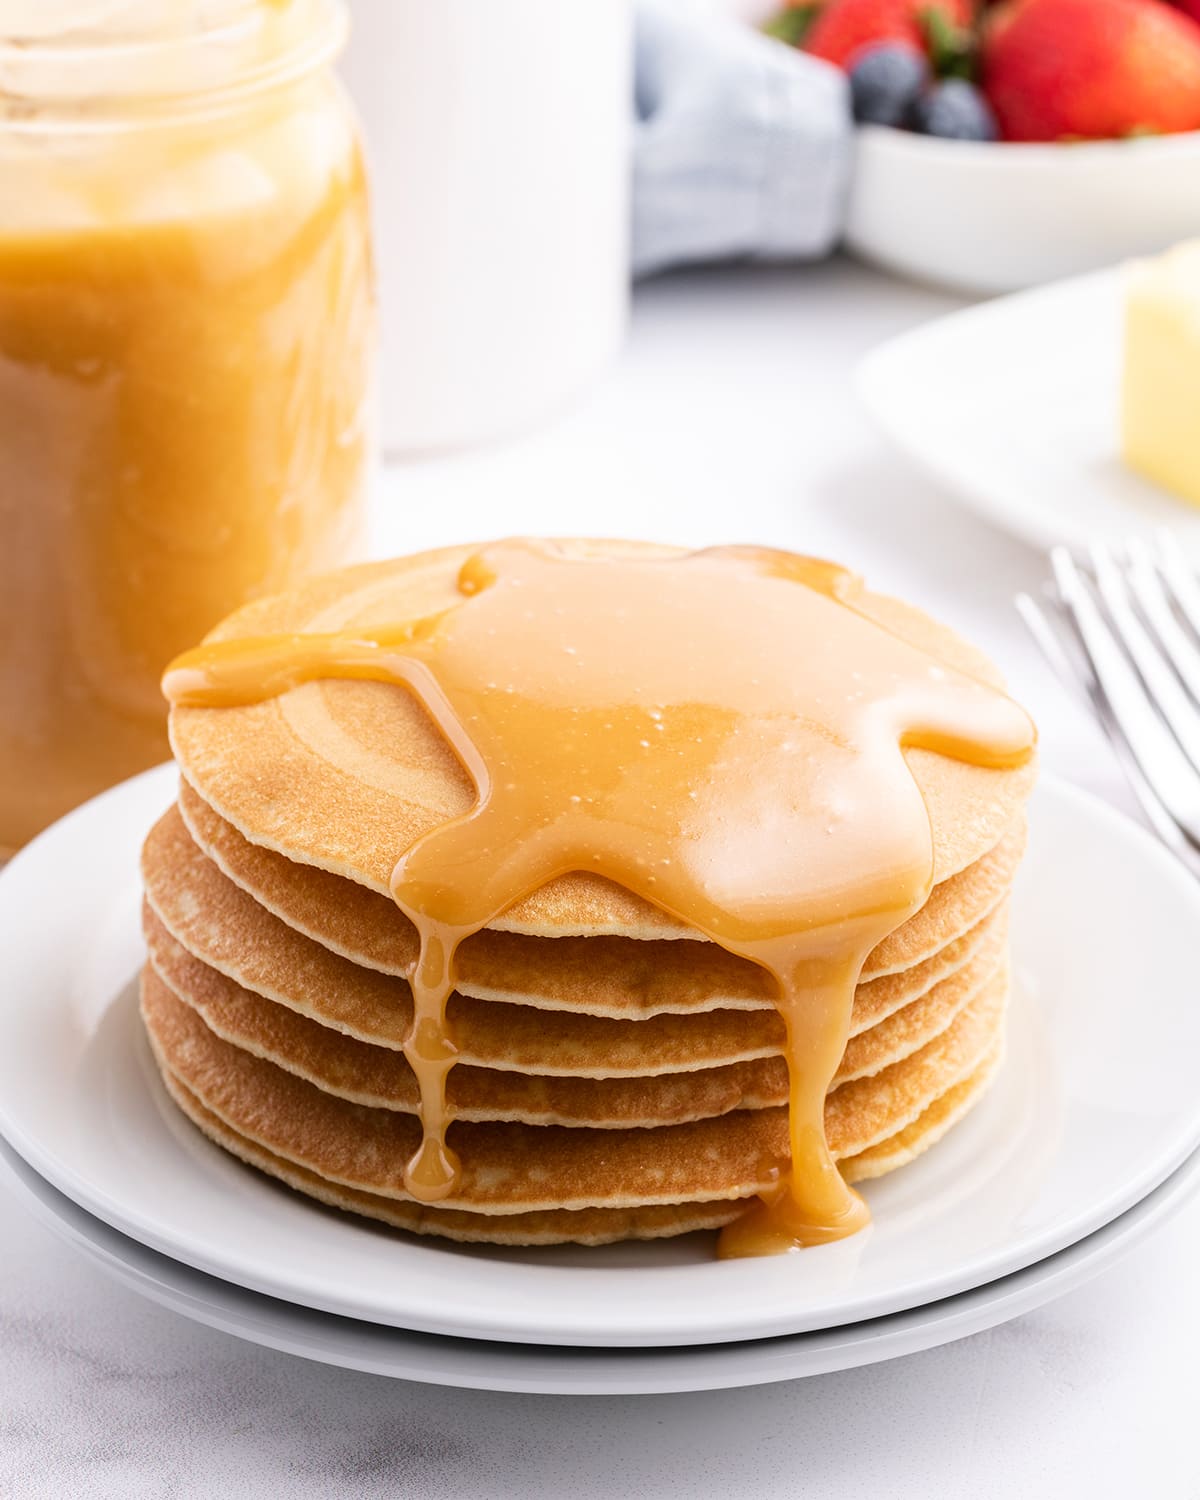 A stack of pancakes topped with a golden colored buttermilk syrup.